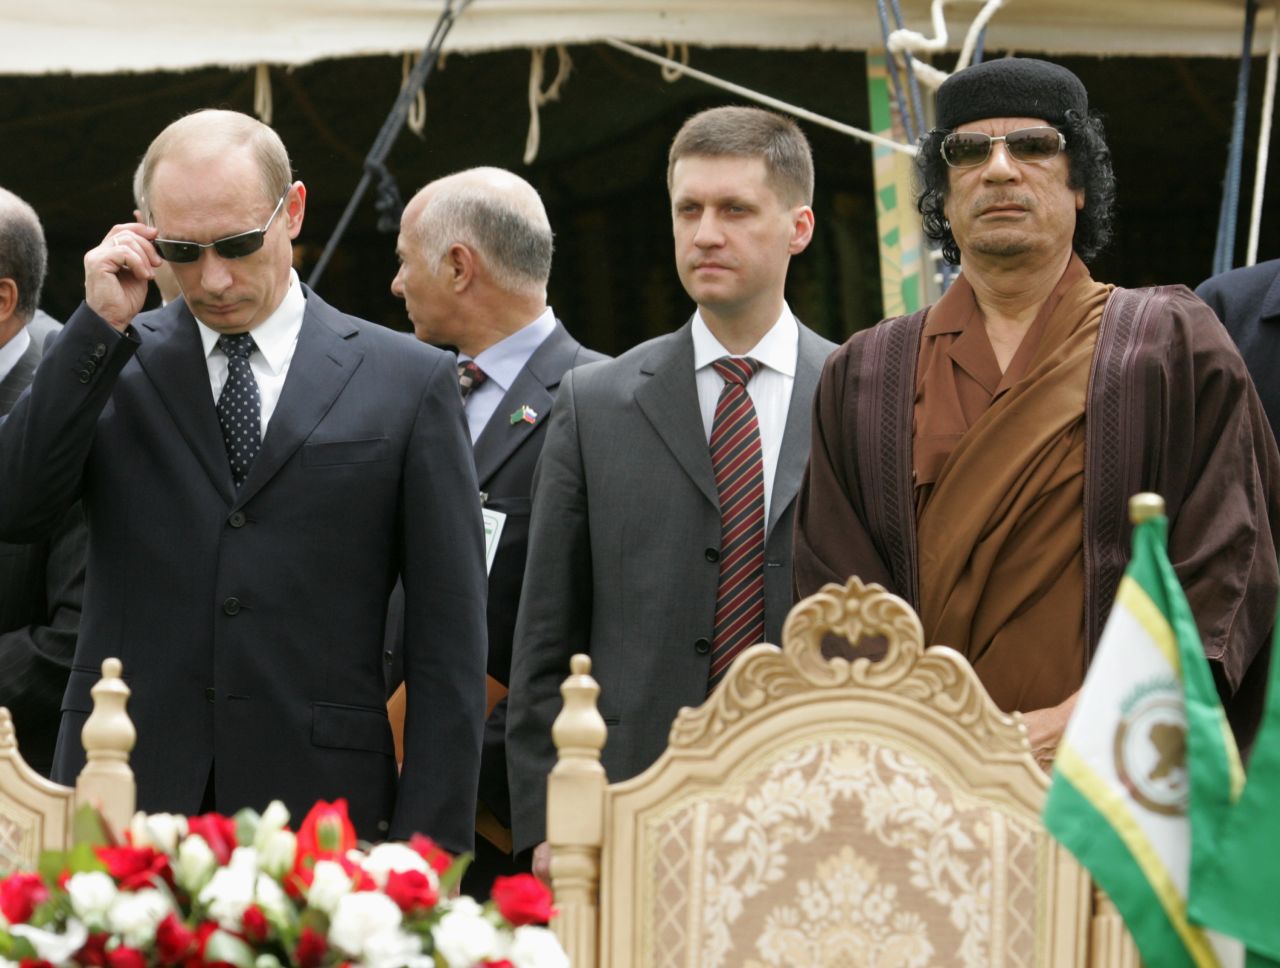 Russian President Vladimir Putin and Gadhafi sign an agreement between Russia and Libya on April 17, 2008, in Tripoli.